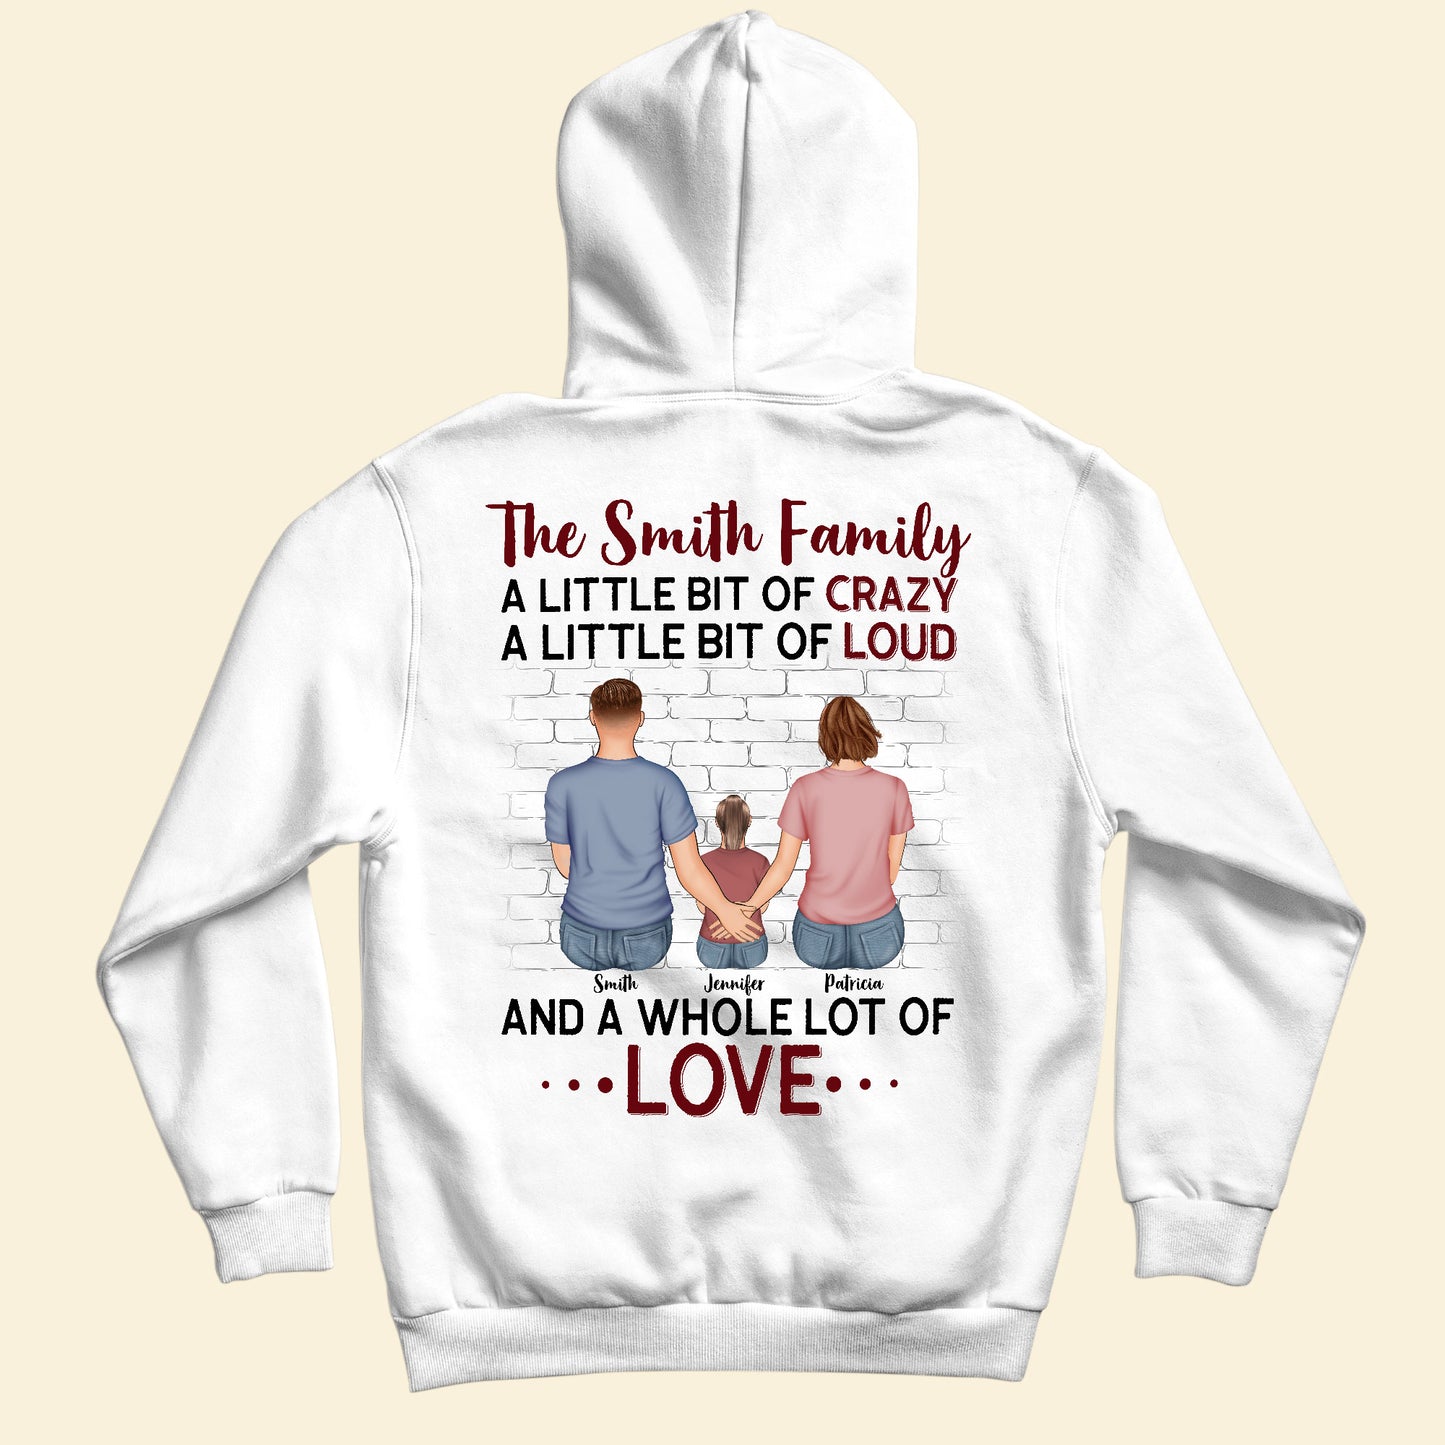 Family, A Little Bit Of Crazy - Personalized Shirt